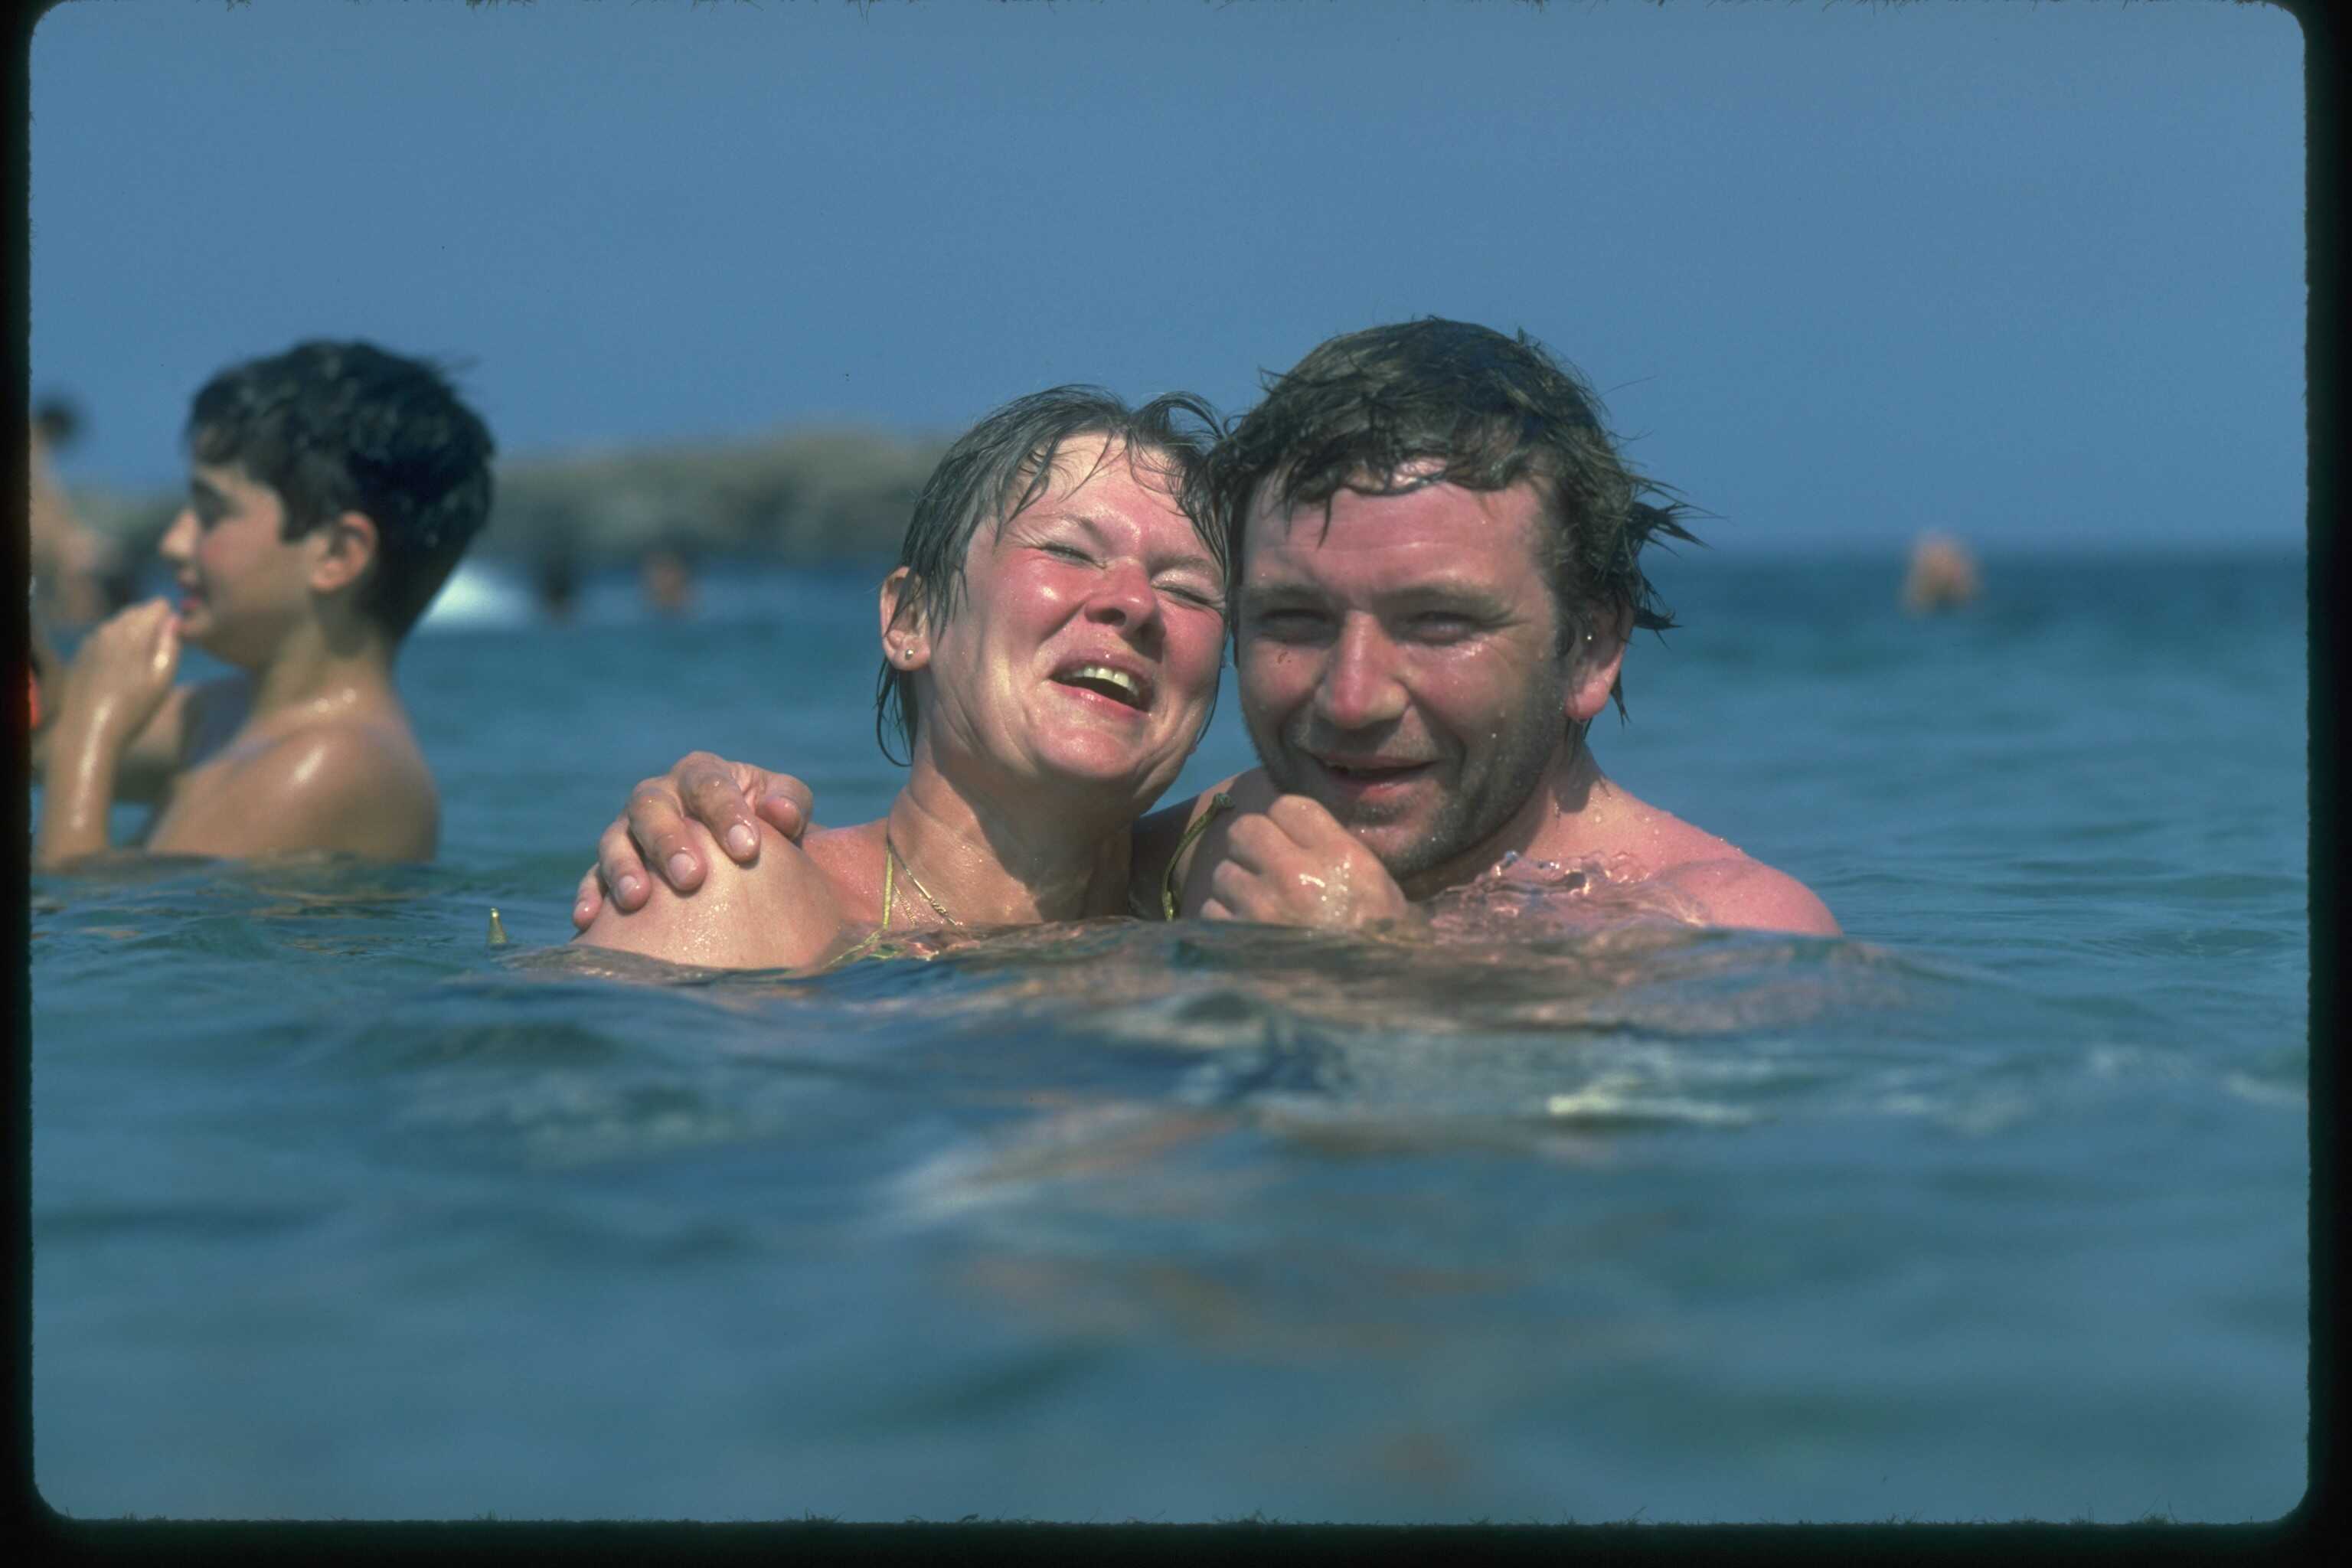 Judi Dench and husband Michael Williams swimming while on holiday in Cyprus, circa 1980 | Source: Getty Images